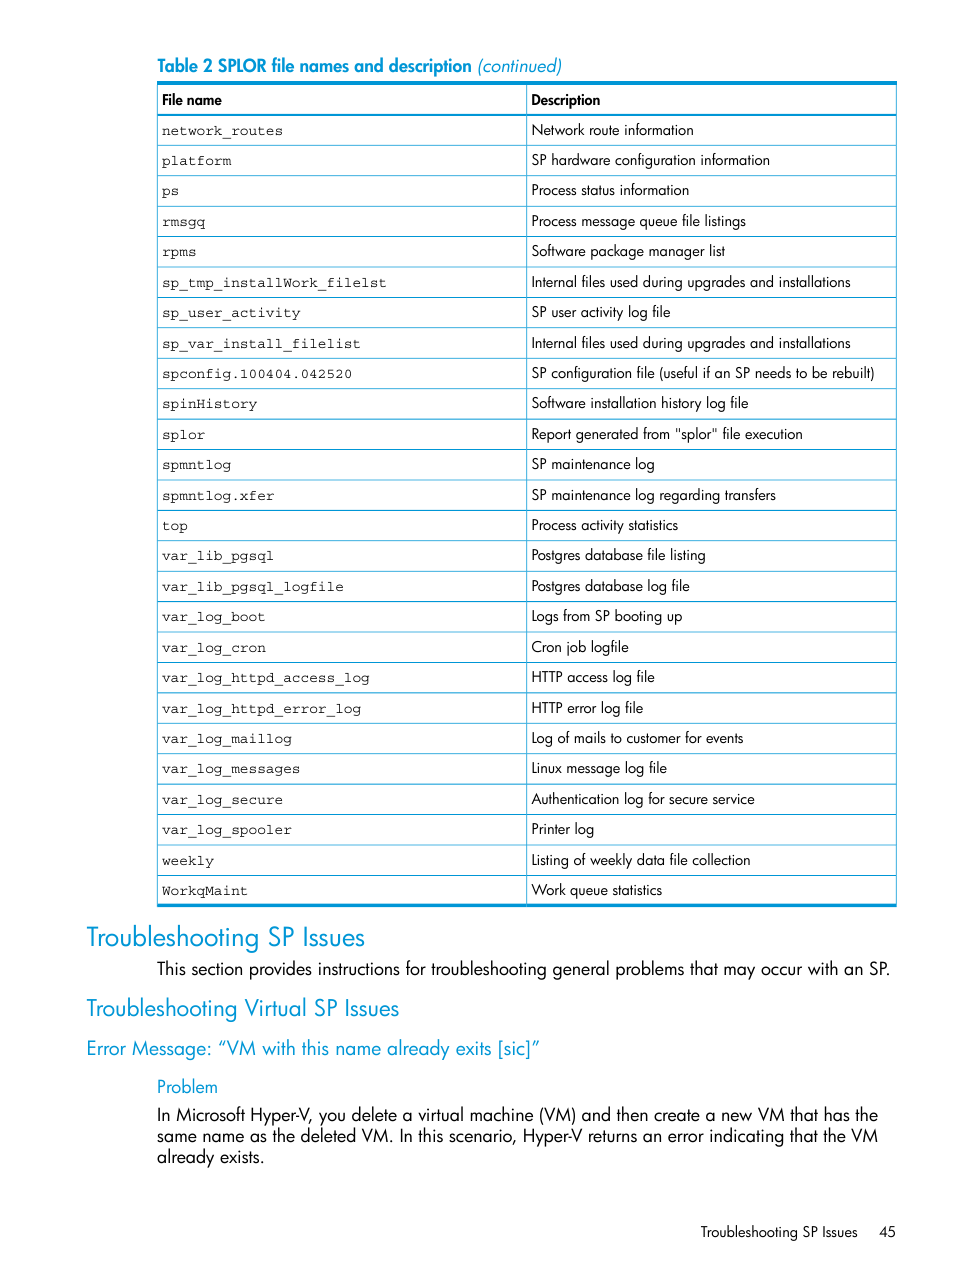 Troubleshooting sp issues, Troubleshooting virtual sp issues | HP 3PAR Service Processors User Manual | Page 45 / 51